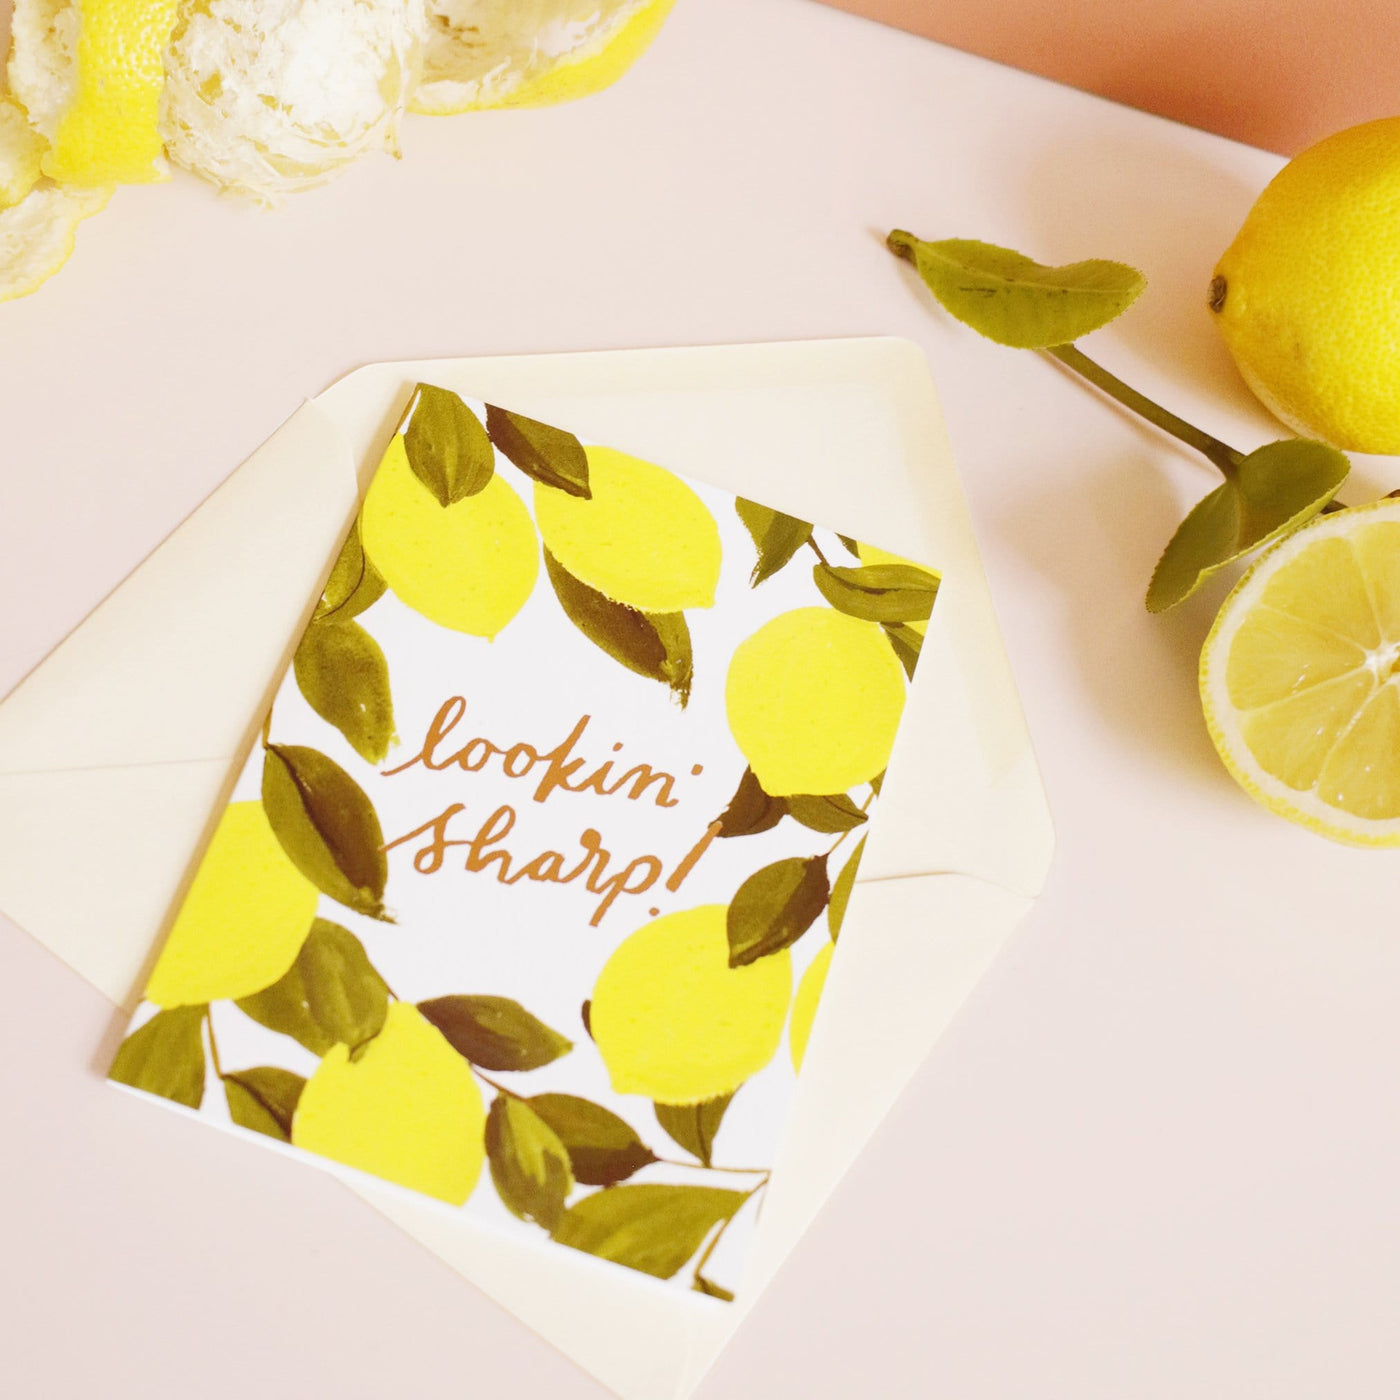 Illustrated Lemon and Green Leaf A6 Card With Looking Sharp In Gold Lettering With Pale Yellow Envelope With Real Lemons  - Annie Dornan Smith